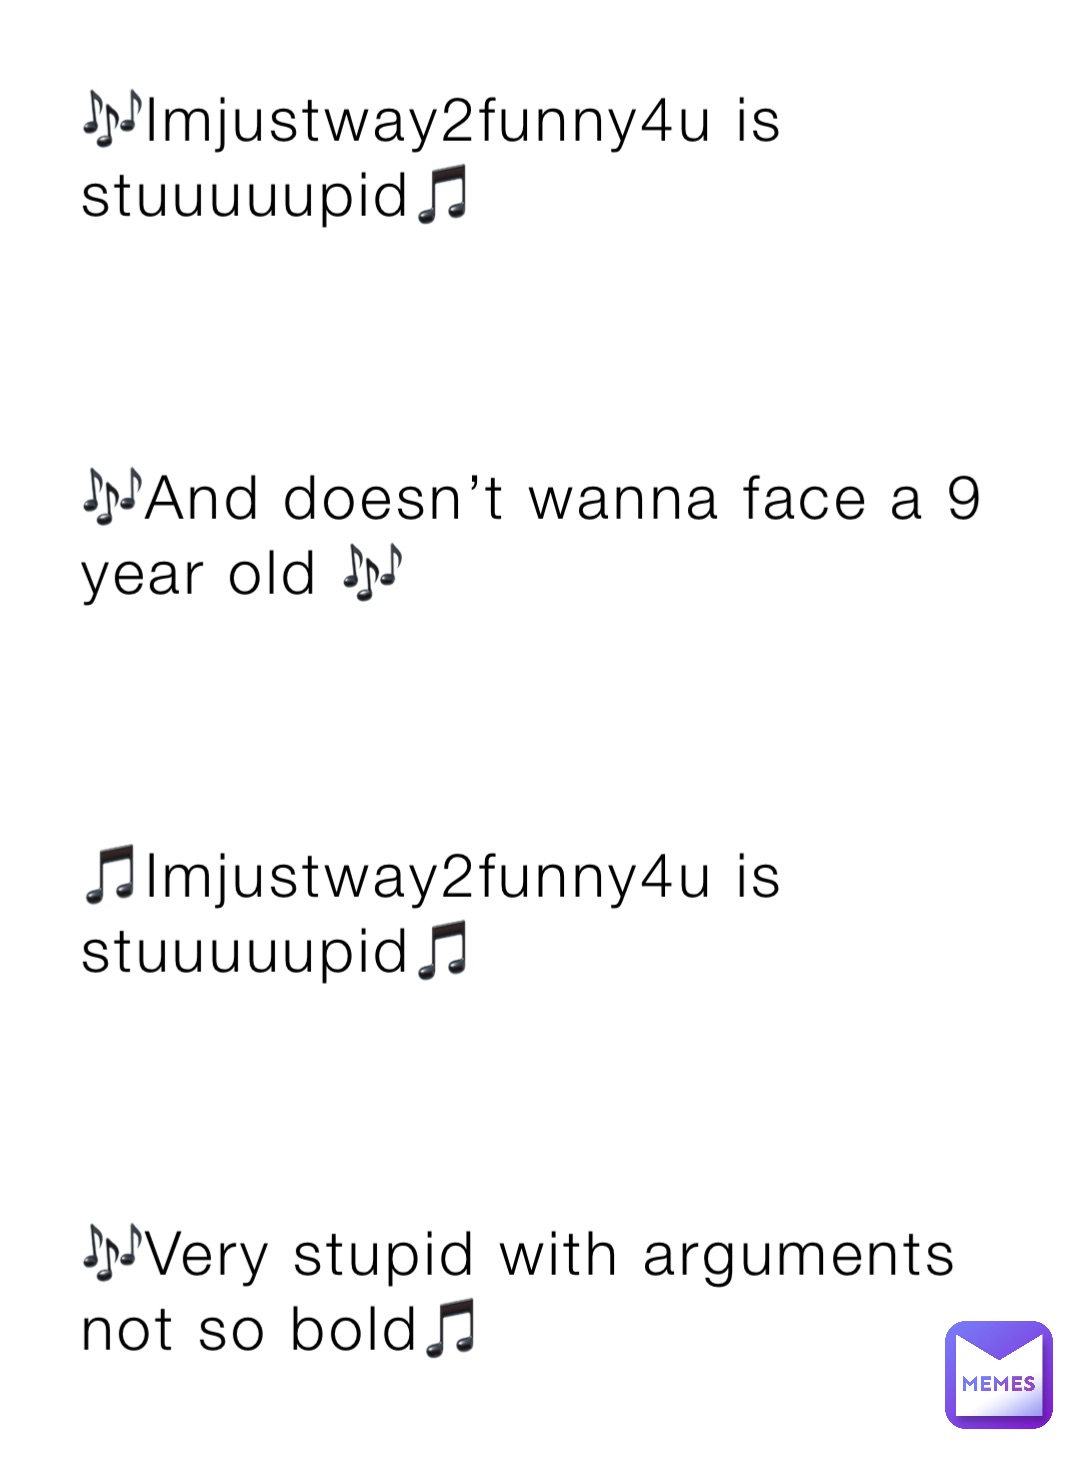 🎶Imjustway2funny4u is stuuuuupid🎵



🎶And doesn’t wanna face a 9 year old 🎶



🎵Imjustway2funny4u is stuuuuupid🎵



🎶Very stupid with arguments not so bold🎵